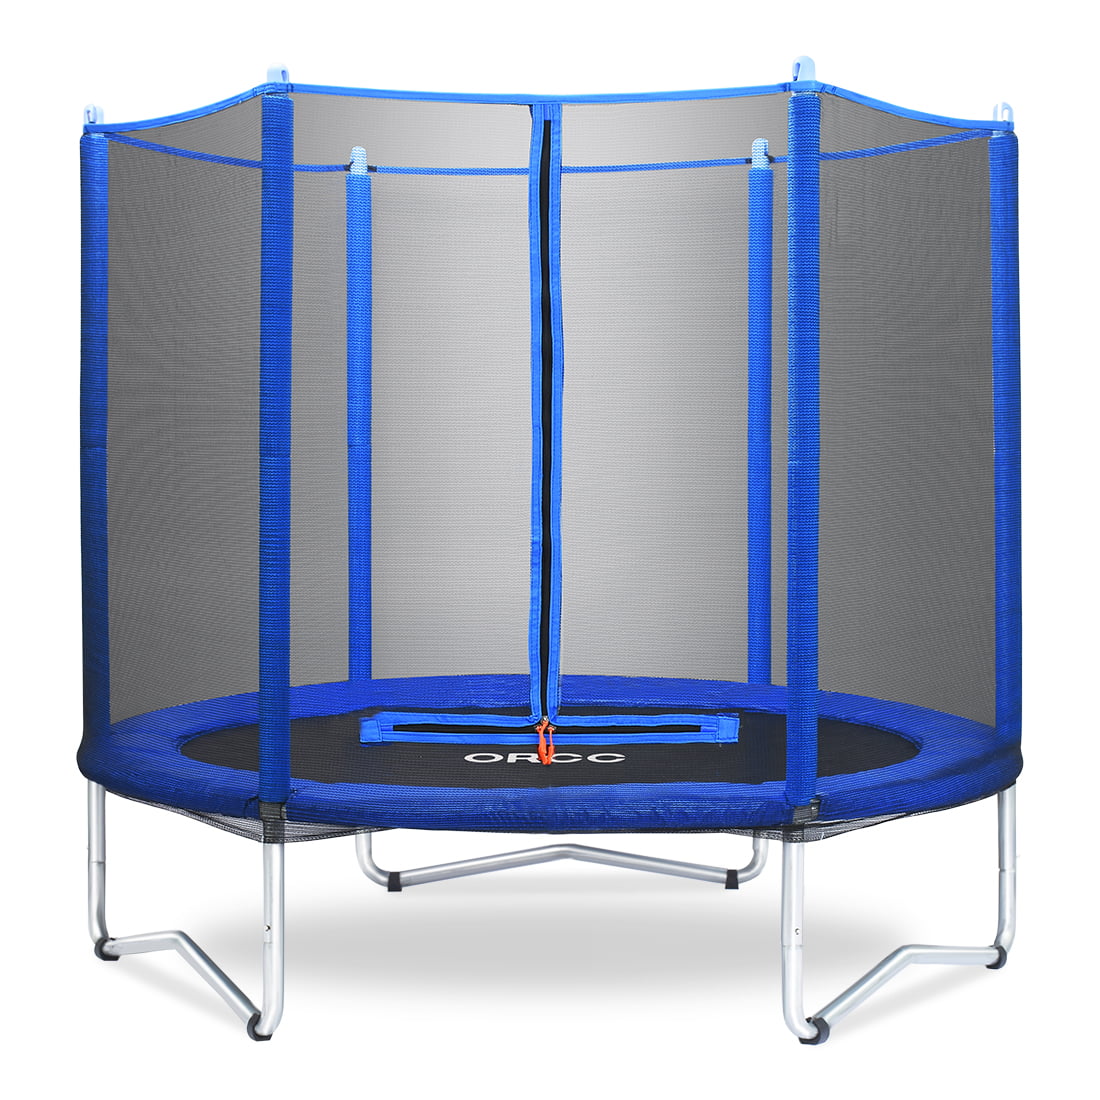 5 FT Outdoor Mini Toddler Trampoline with Safety Enclosure for Fun Aseem Indoor Trampoline for Kids with Net 60 Small Trampoline Jumping Mat for Toddlers 